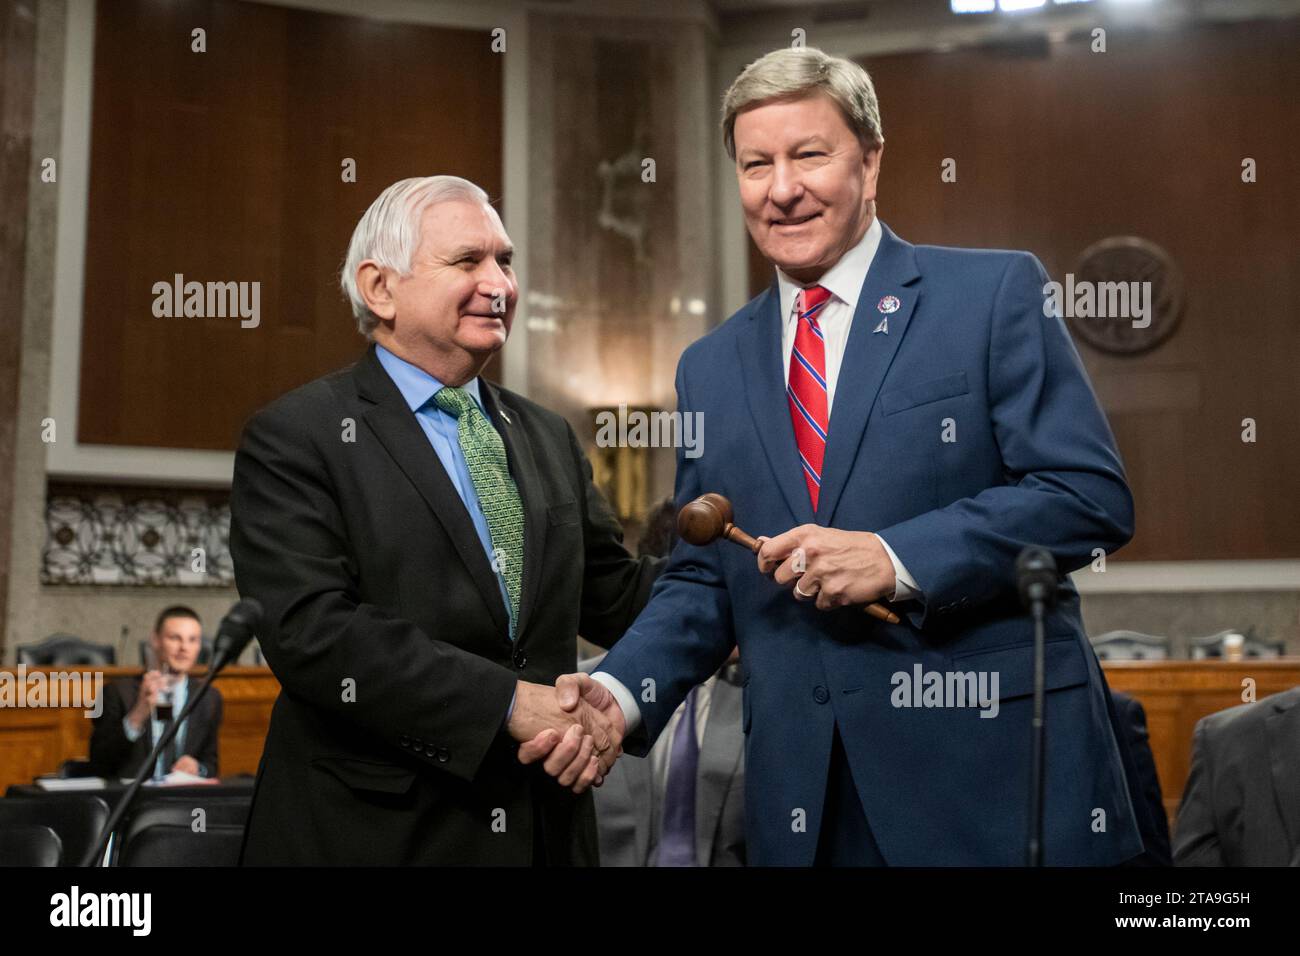 Washington, United States Of America. 29th Nov, 2023. United States House Armed Services Chairman Mike Rogers (Republican of Alabama), right, receives the gavel from US Senate Armed Services Chairman Jack Reed (Democrat of Rhode Island) during a Joint Conference Committee meeting of conferees on the National Defense Authorization Act for Fiscal Year 2024, in the Dirksen Senate Office Building in Washington, DC, Wednesday, November 29, 2023. Credit: Rod Lamkey/CNP/Sipa USA Credit: Sipa USA/Alamy Live News Stock Photo